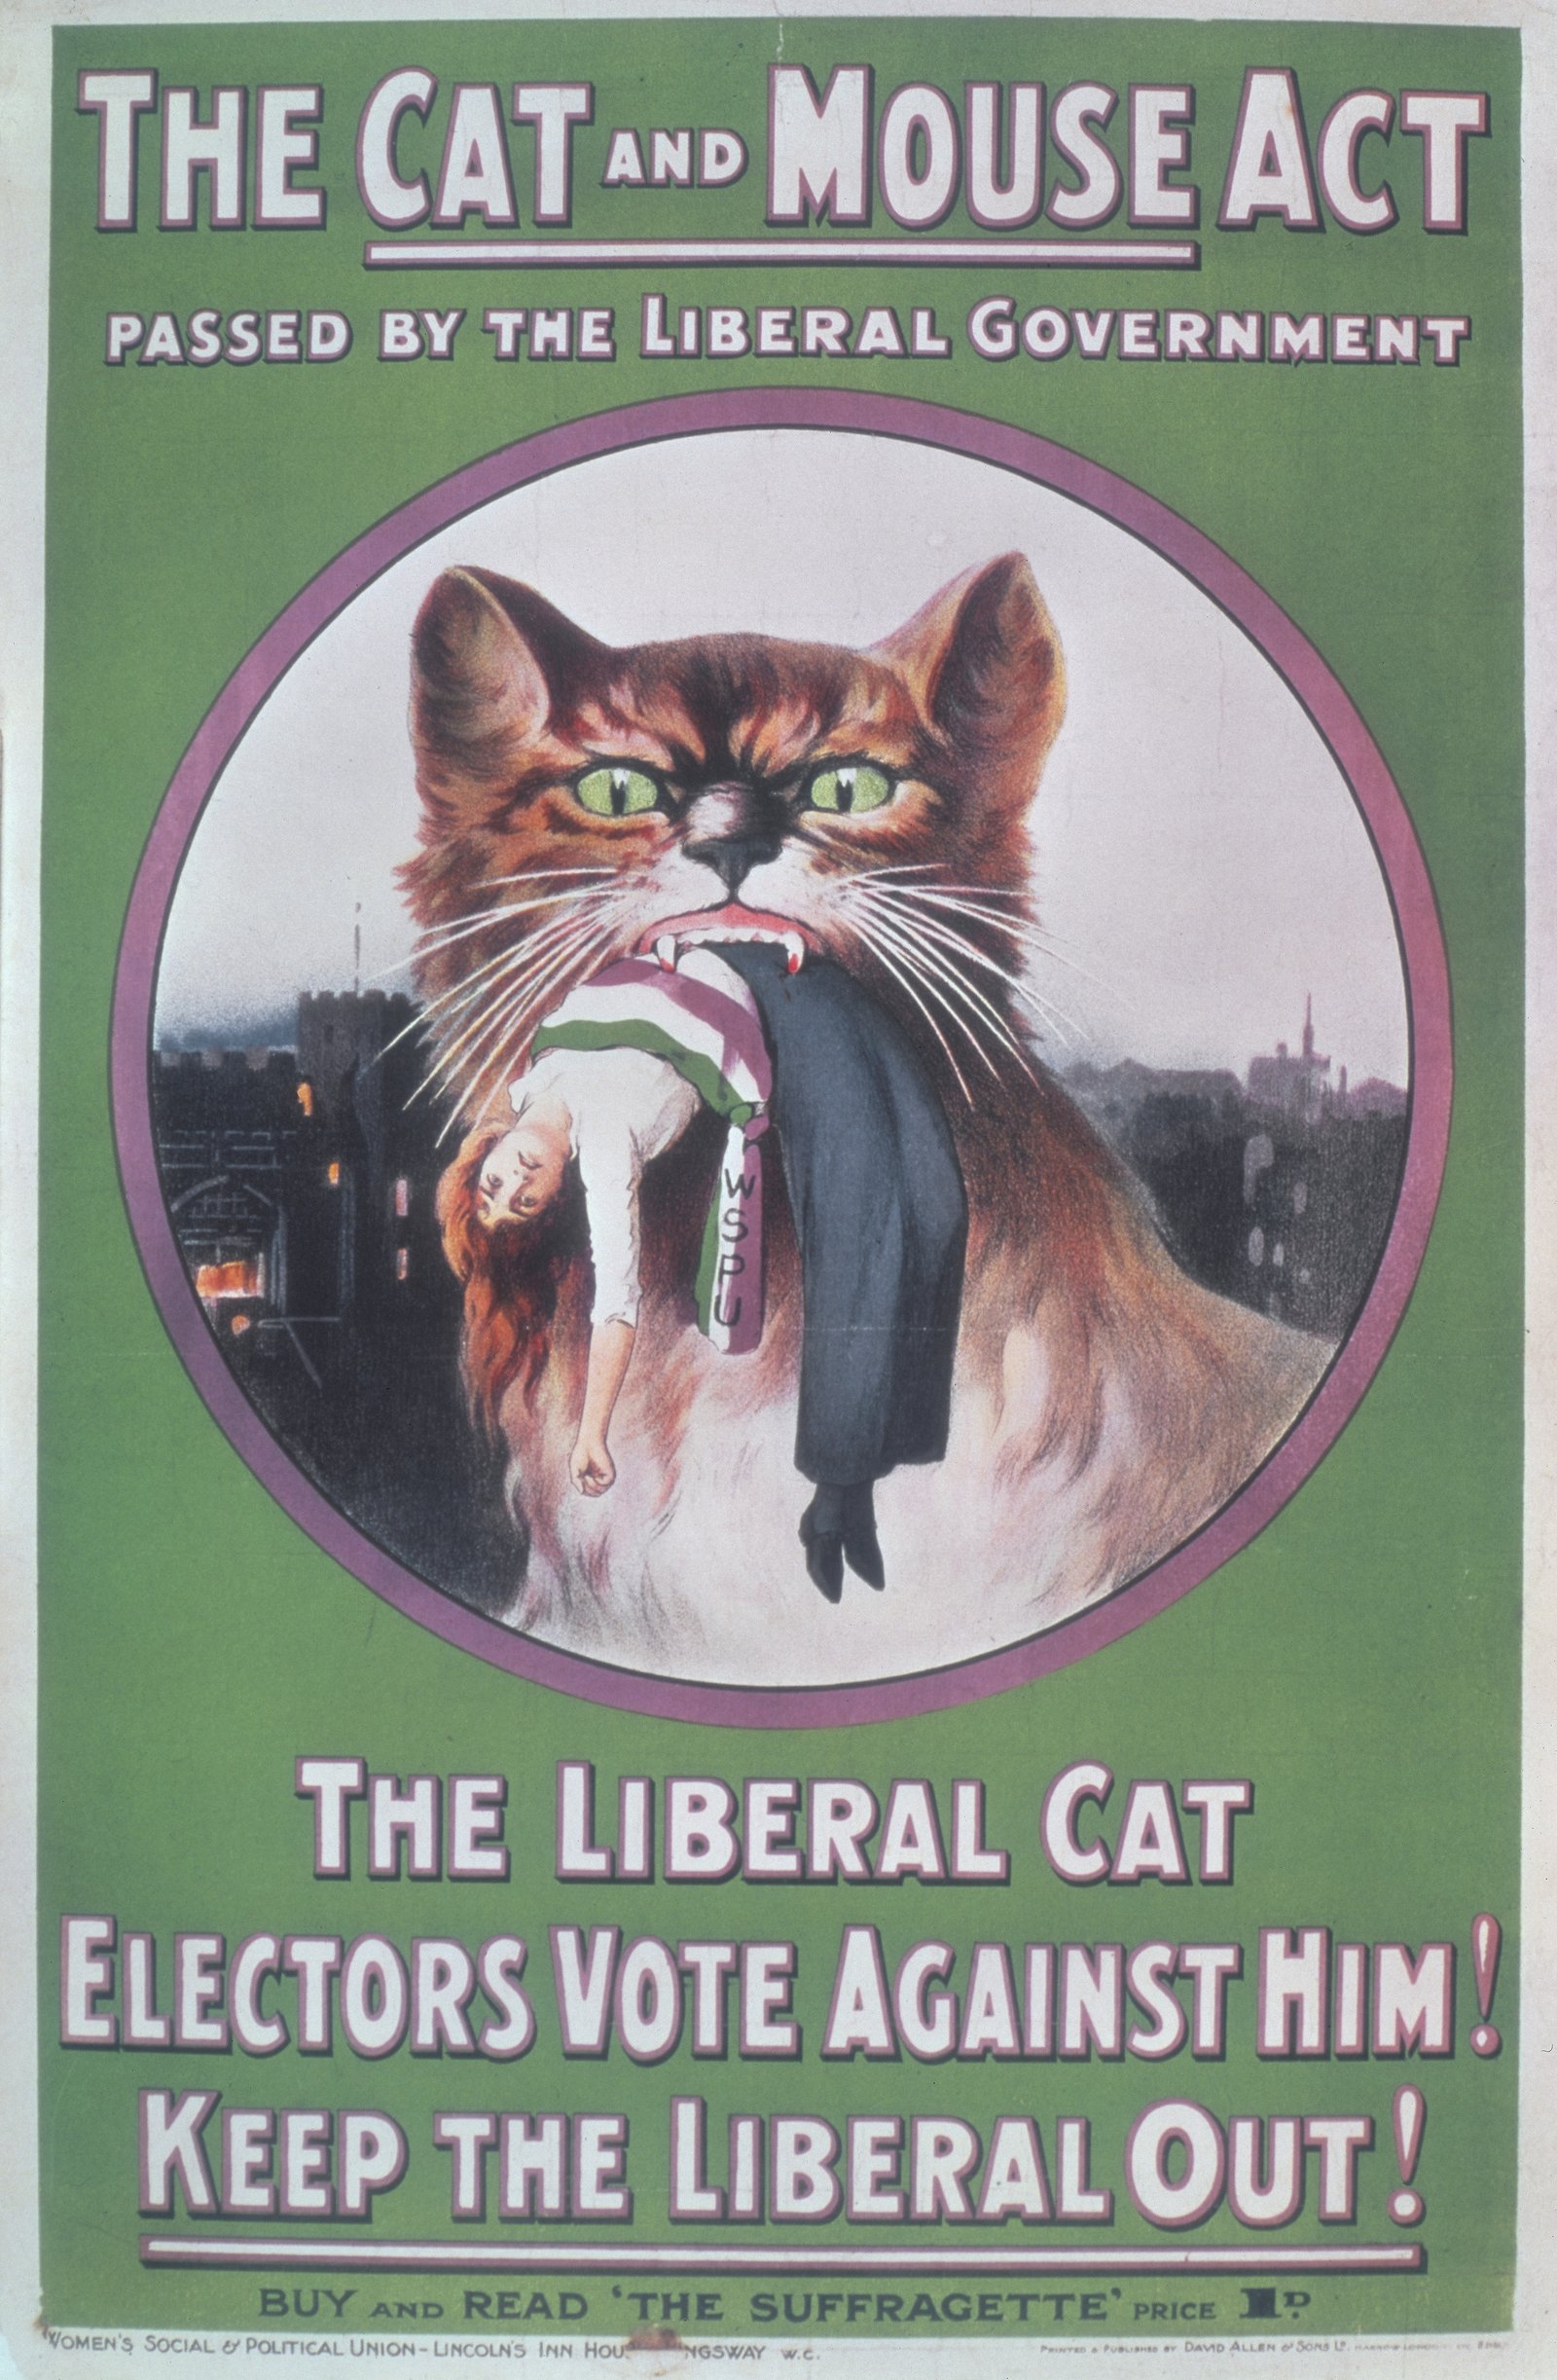 Image - 1914 poster protesting the Cat and Mouse act. Photo by Museum of London/Heritage Images/Getty Images